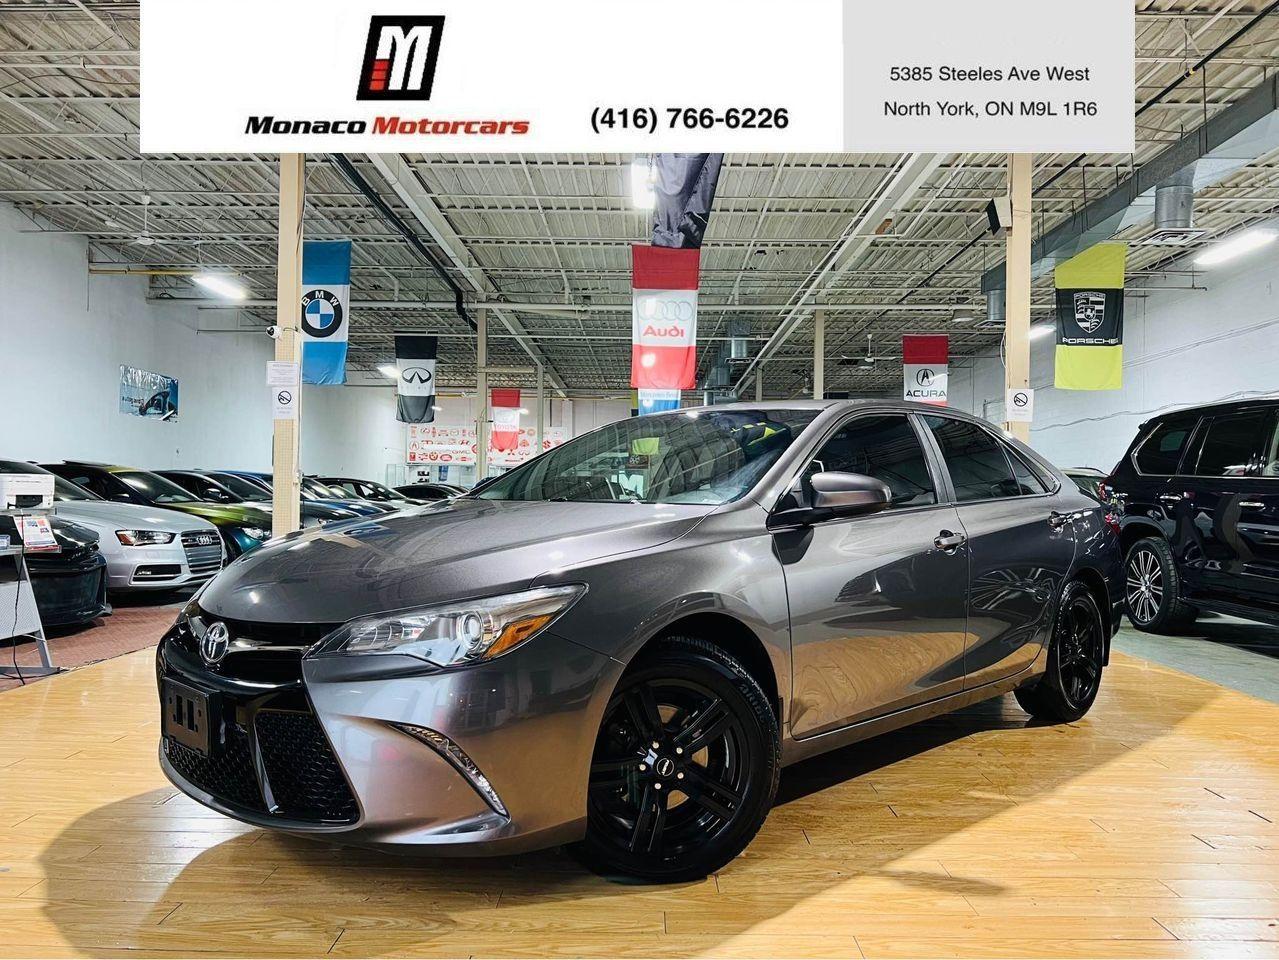 2017 Toyota Camry SE - ONE OWNER |HEATED SEATS |CAMERA| 8 Rims - Photo #1